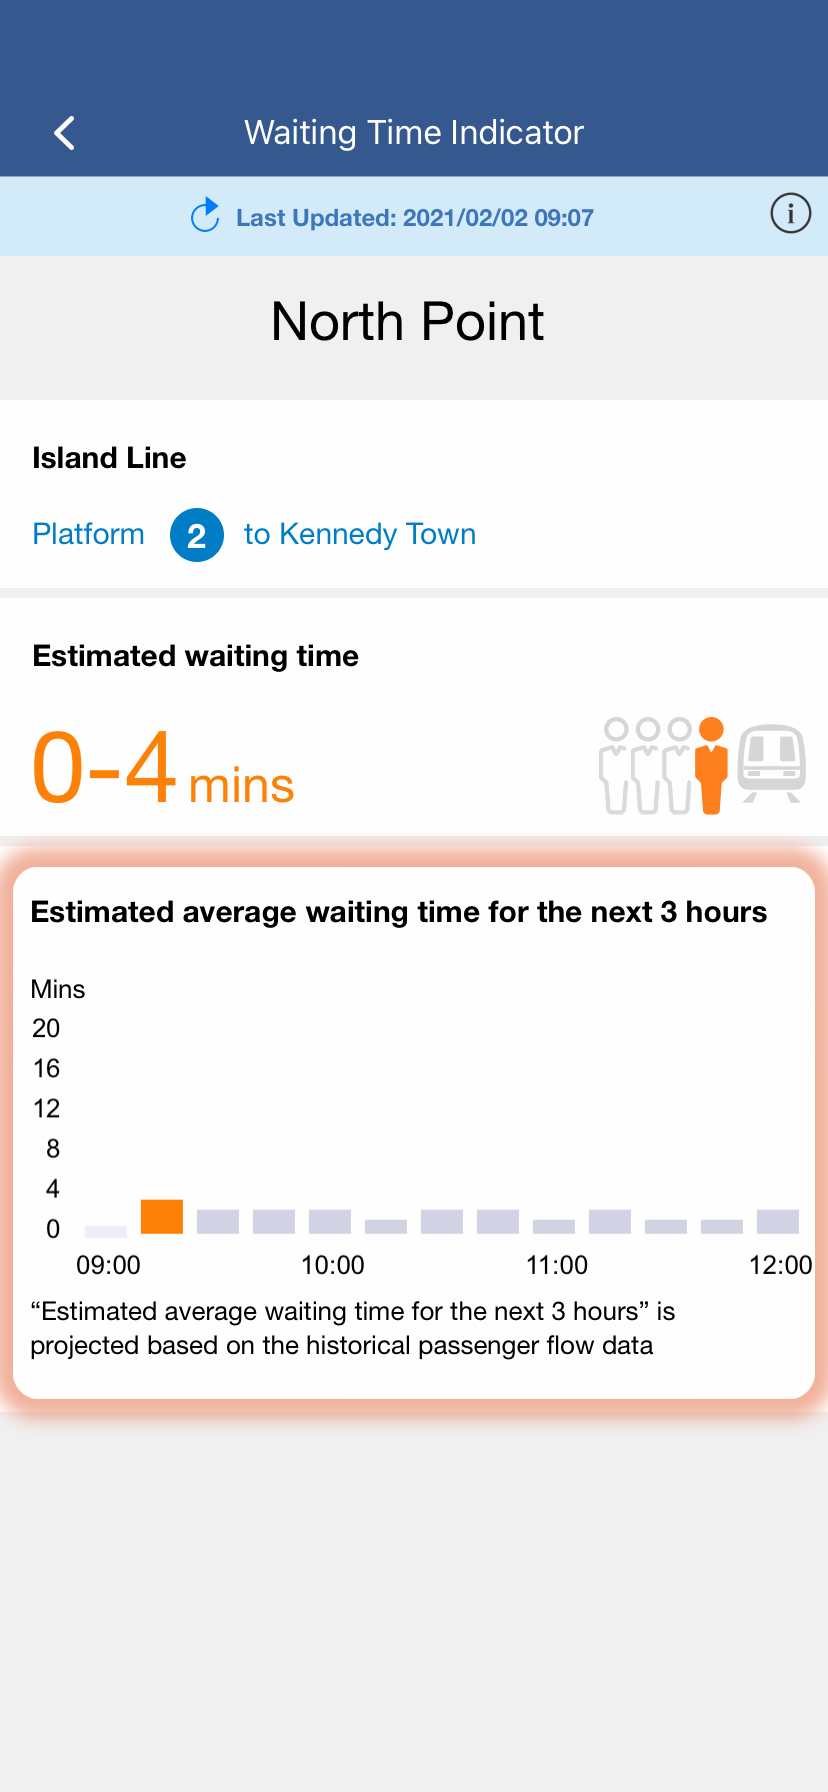 The estimated average waiting time for the next 3 hours1 is projected based on historical passenger flow data for your reference